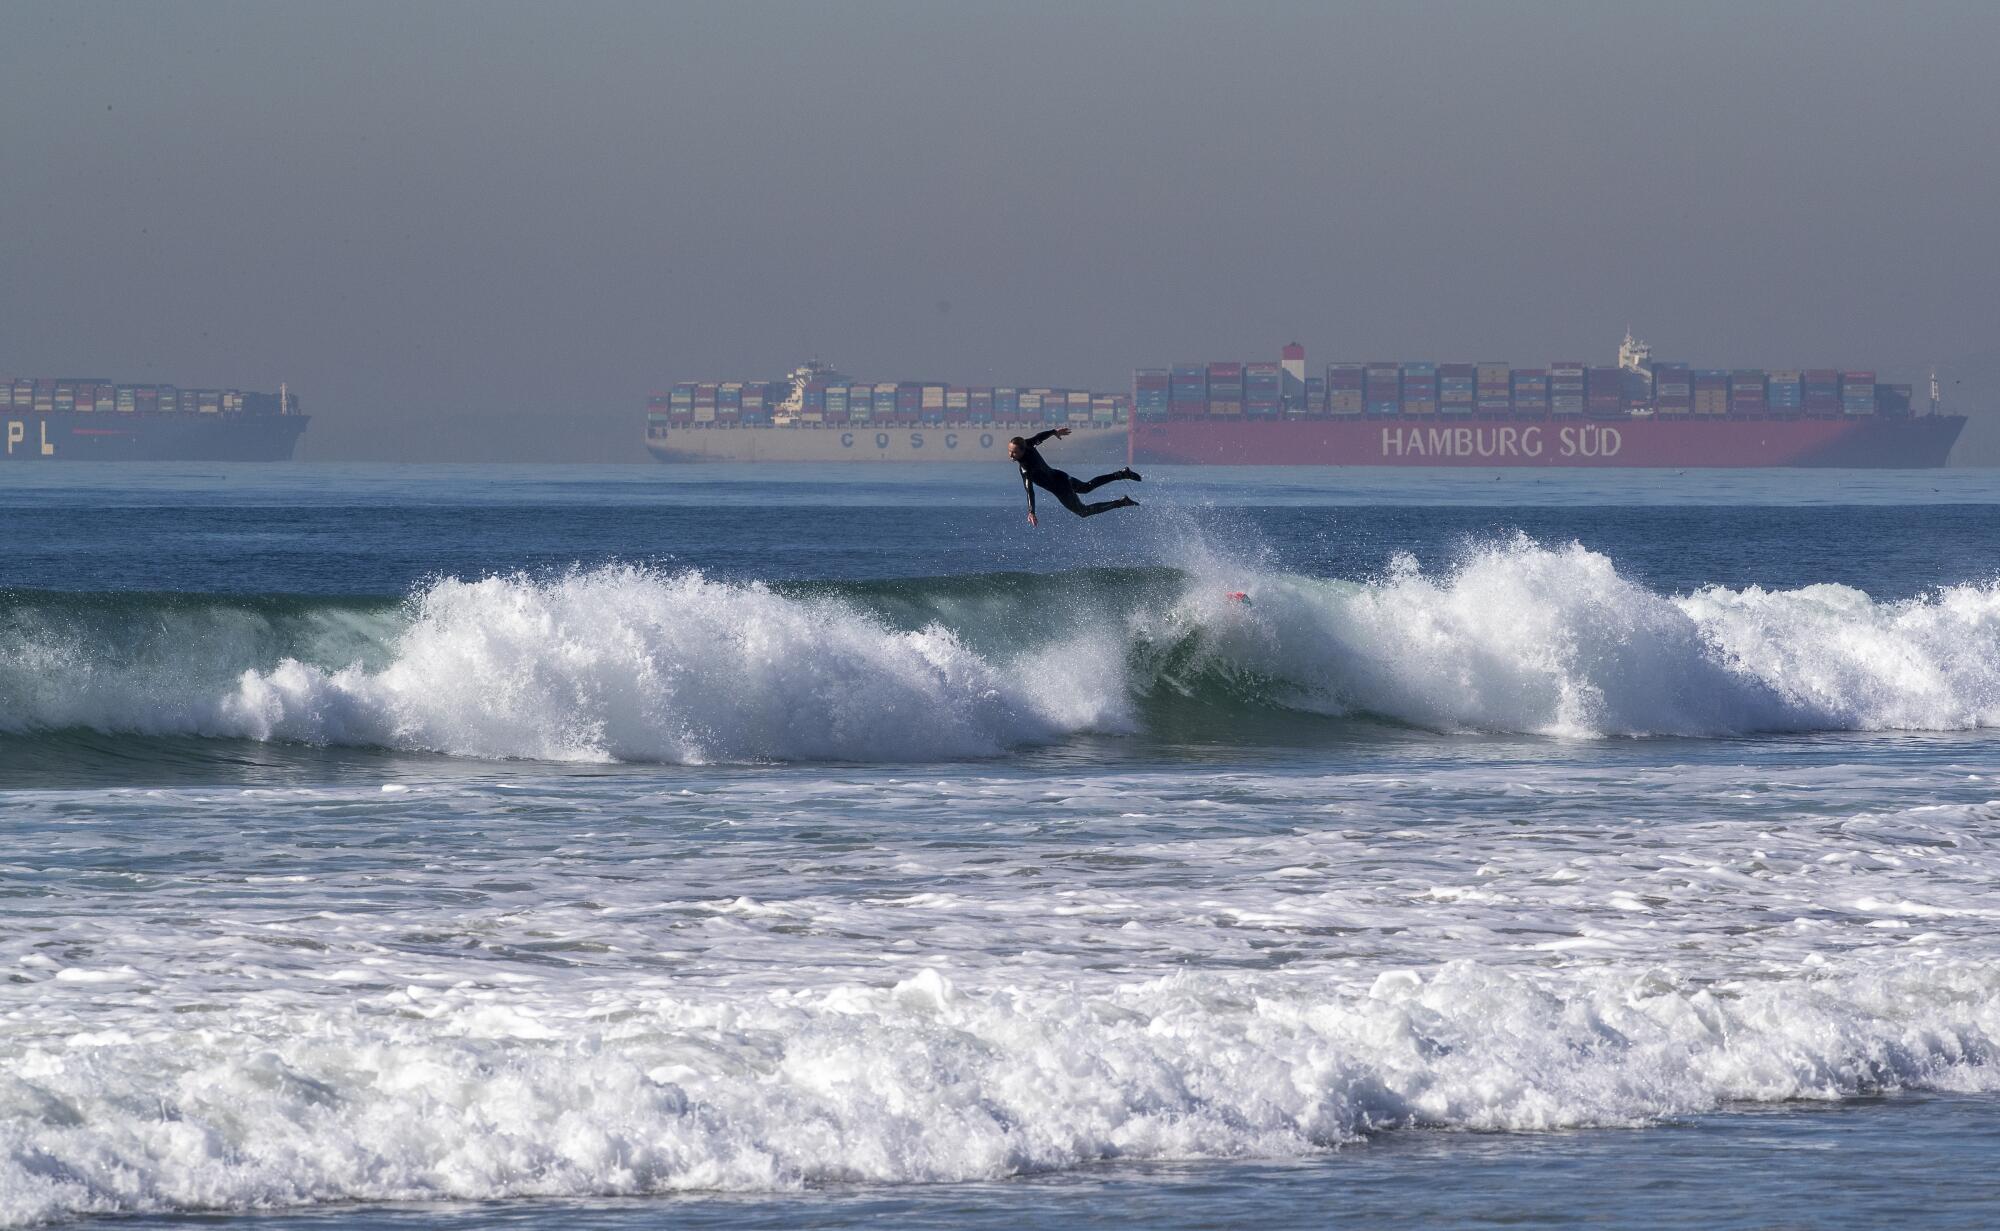 A surfer going airborne with cargo ships in the distance